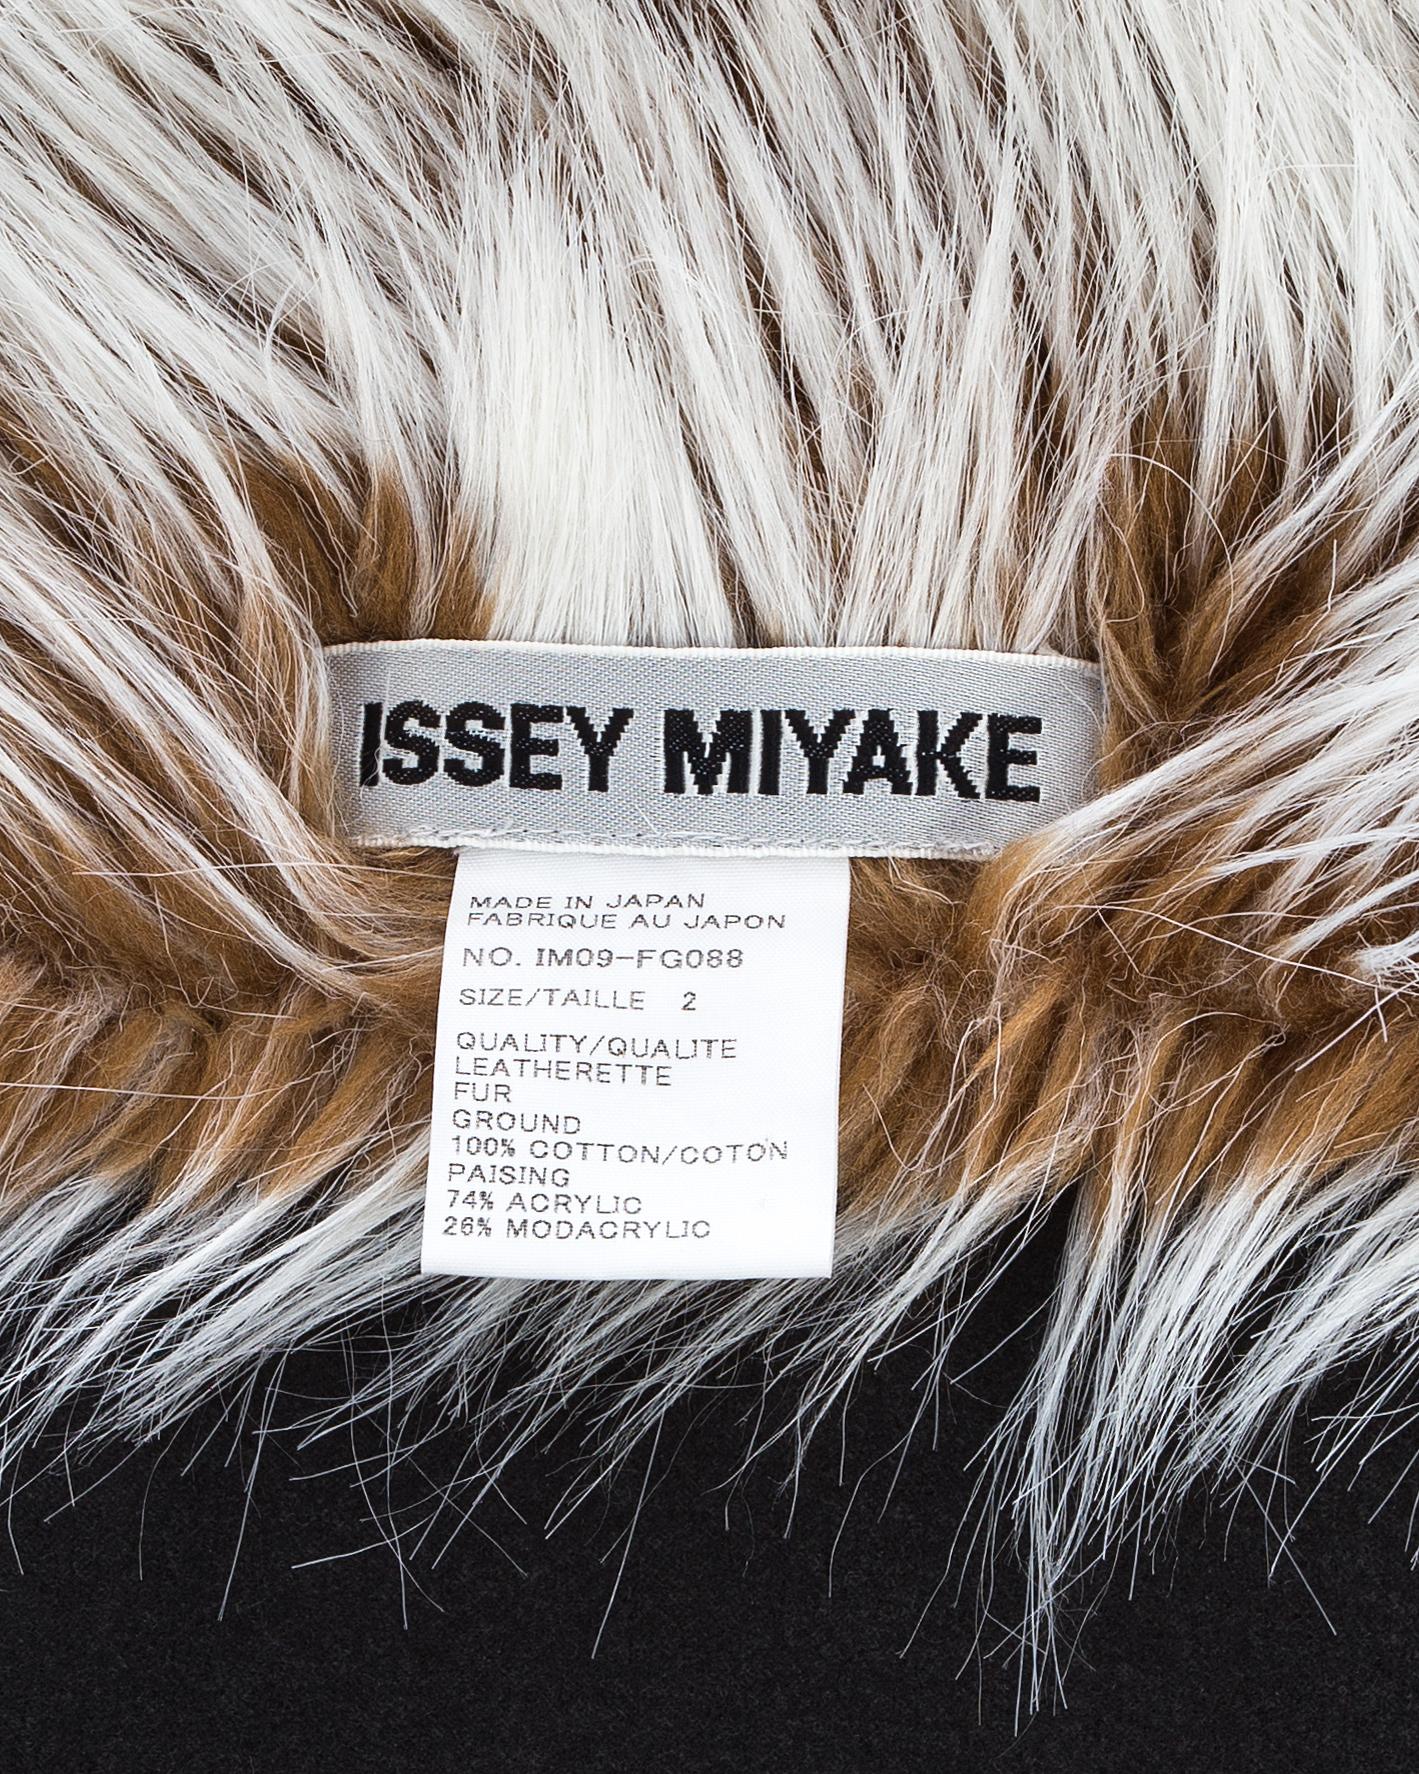 Issey Miyake blue leatherette and faux fur wrap skirt and vest set, fw 2000 For Sale 2